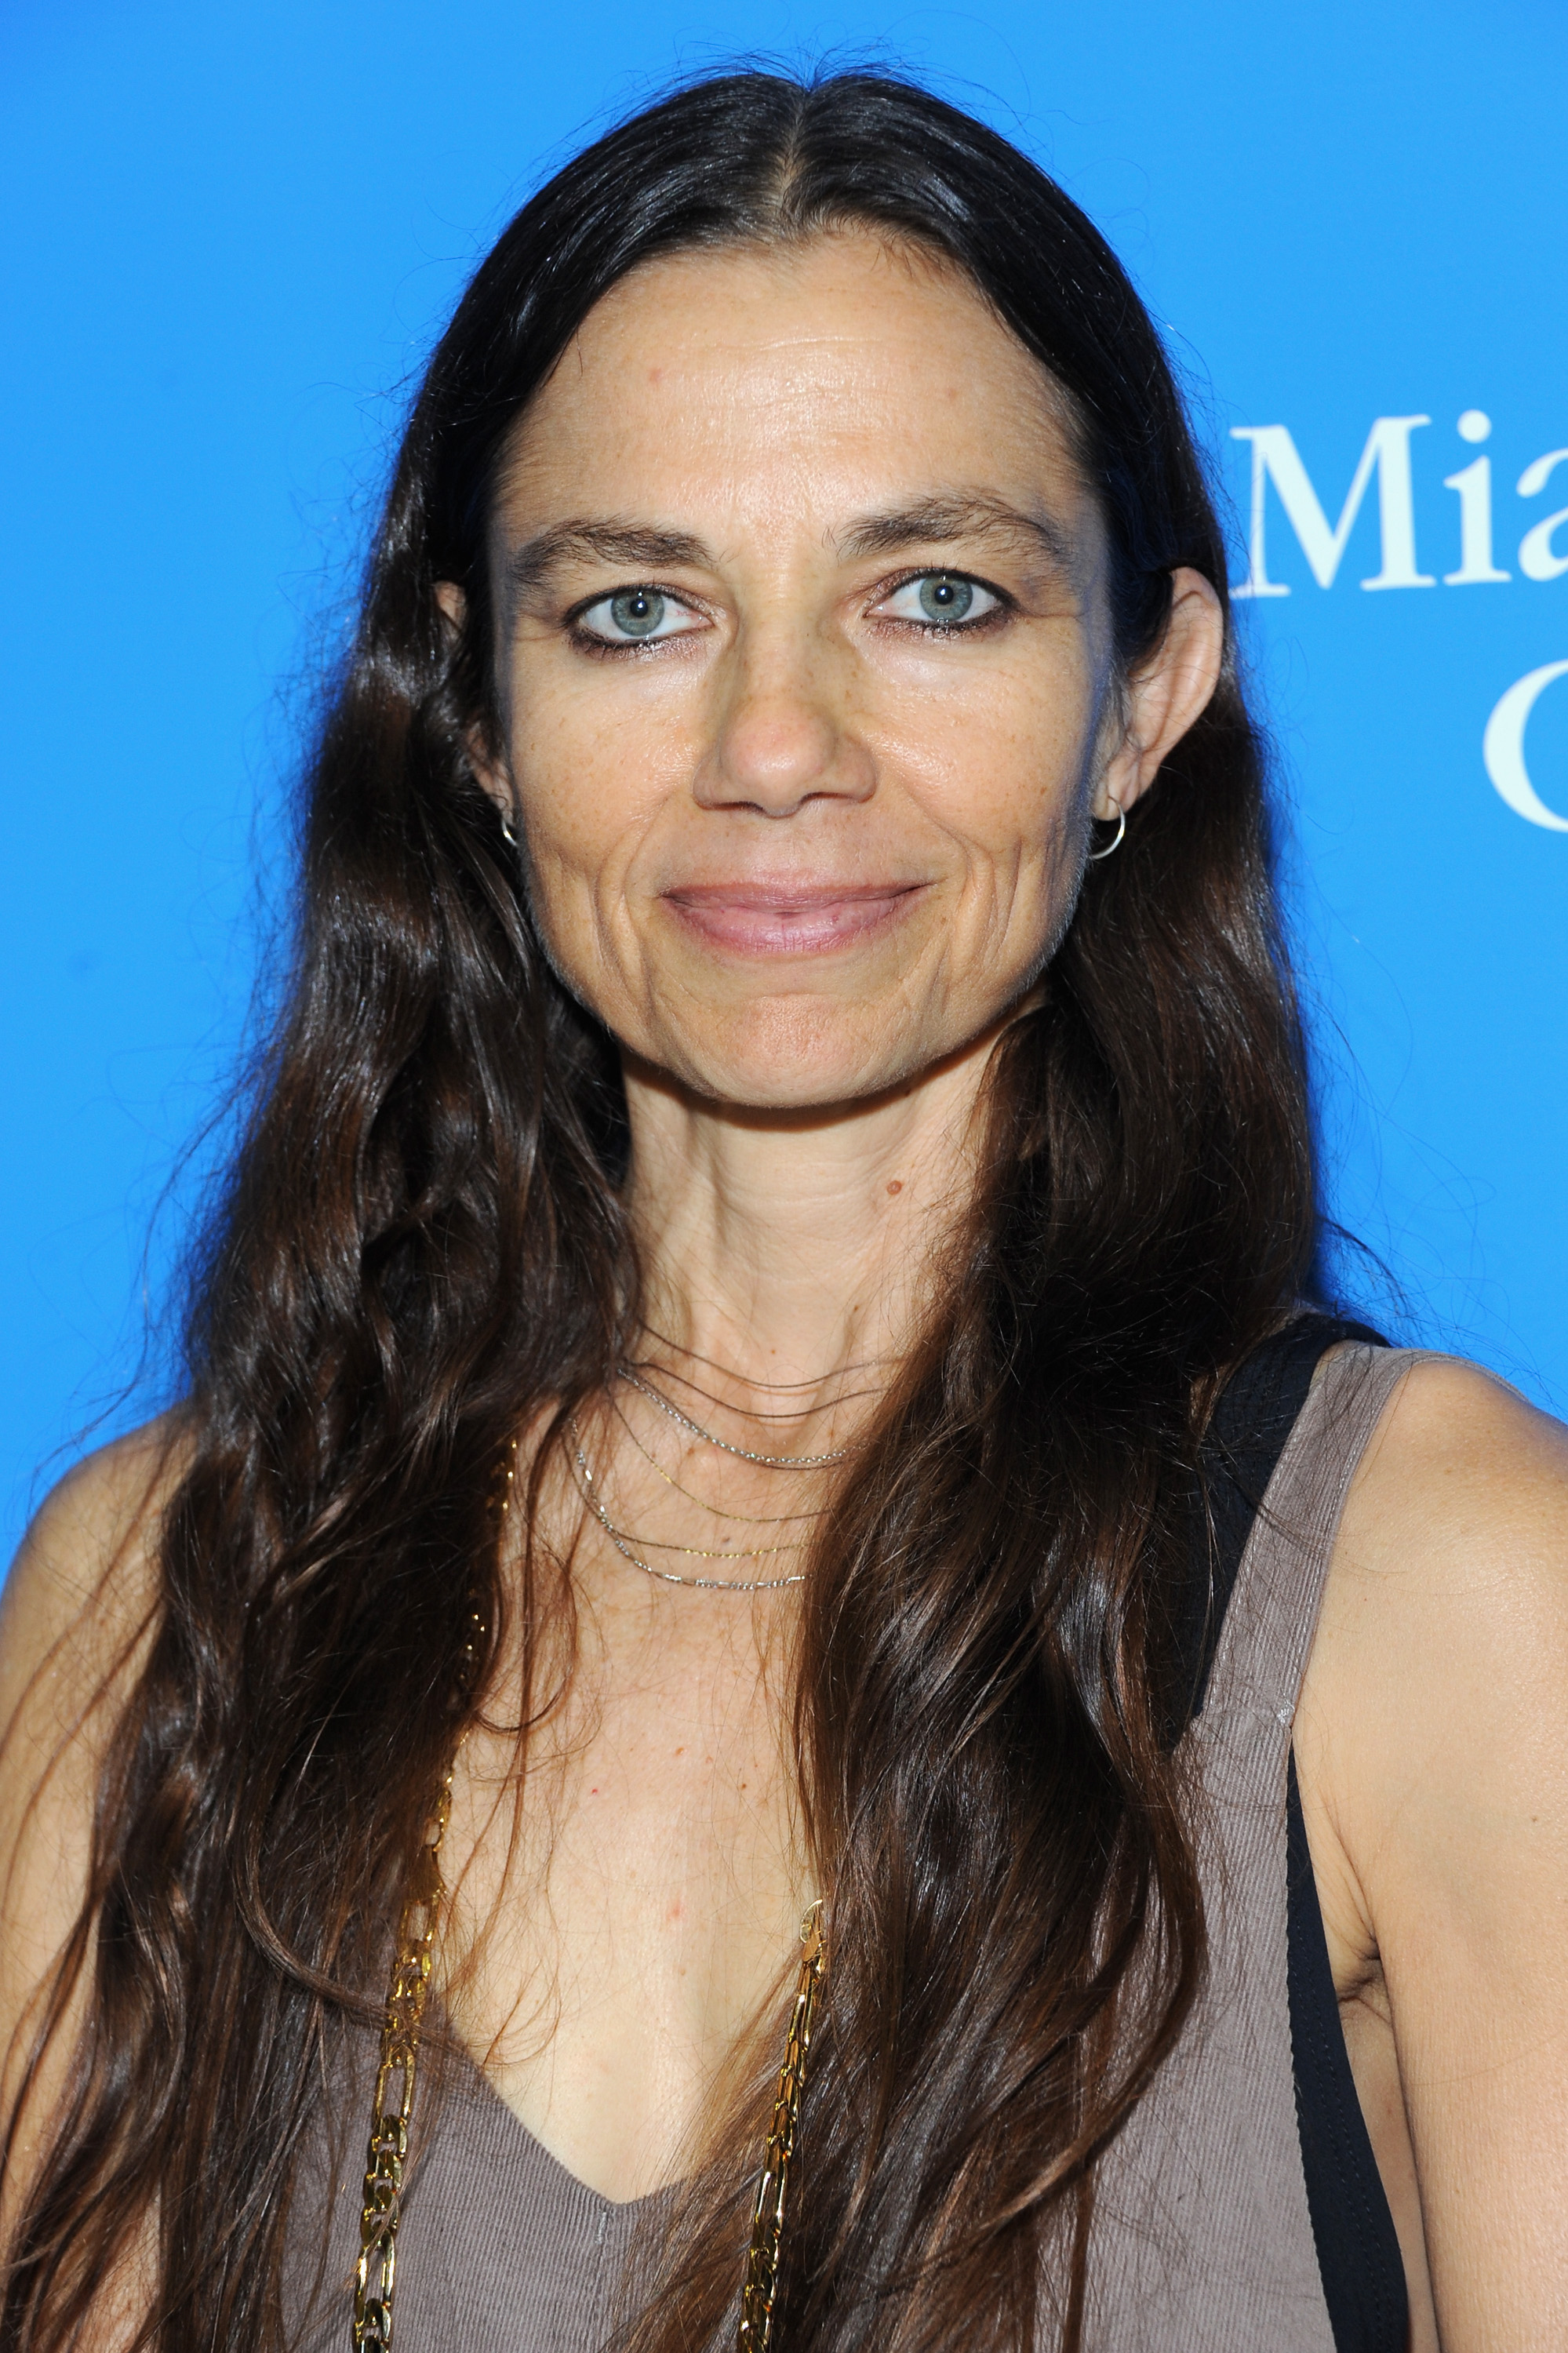 Justine Bateman at Miami Dade College on November 17, 2018 in Miami, Florida | Source: Getty Images